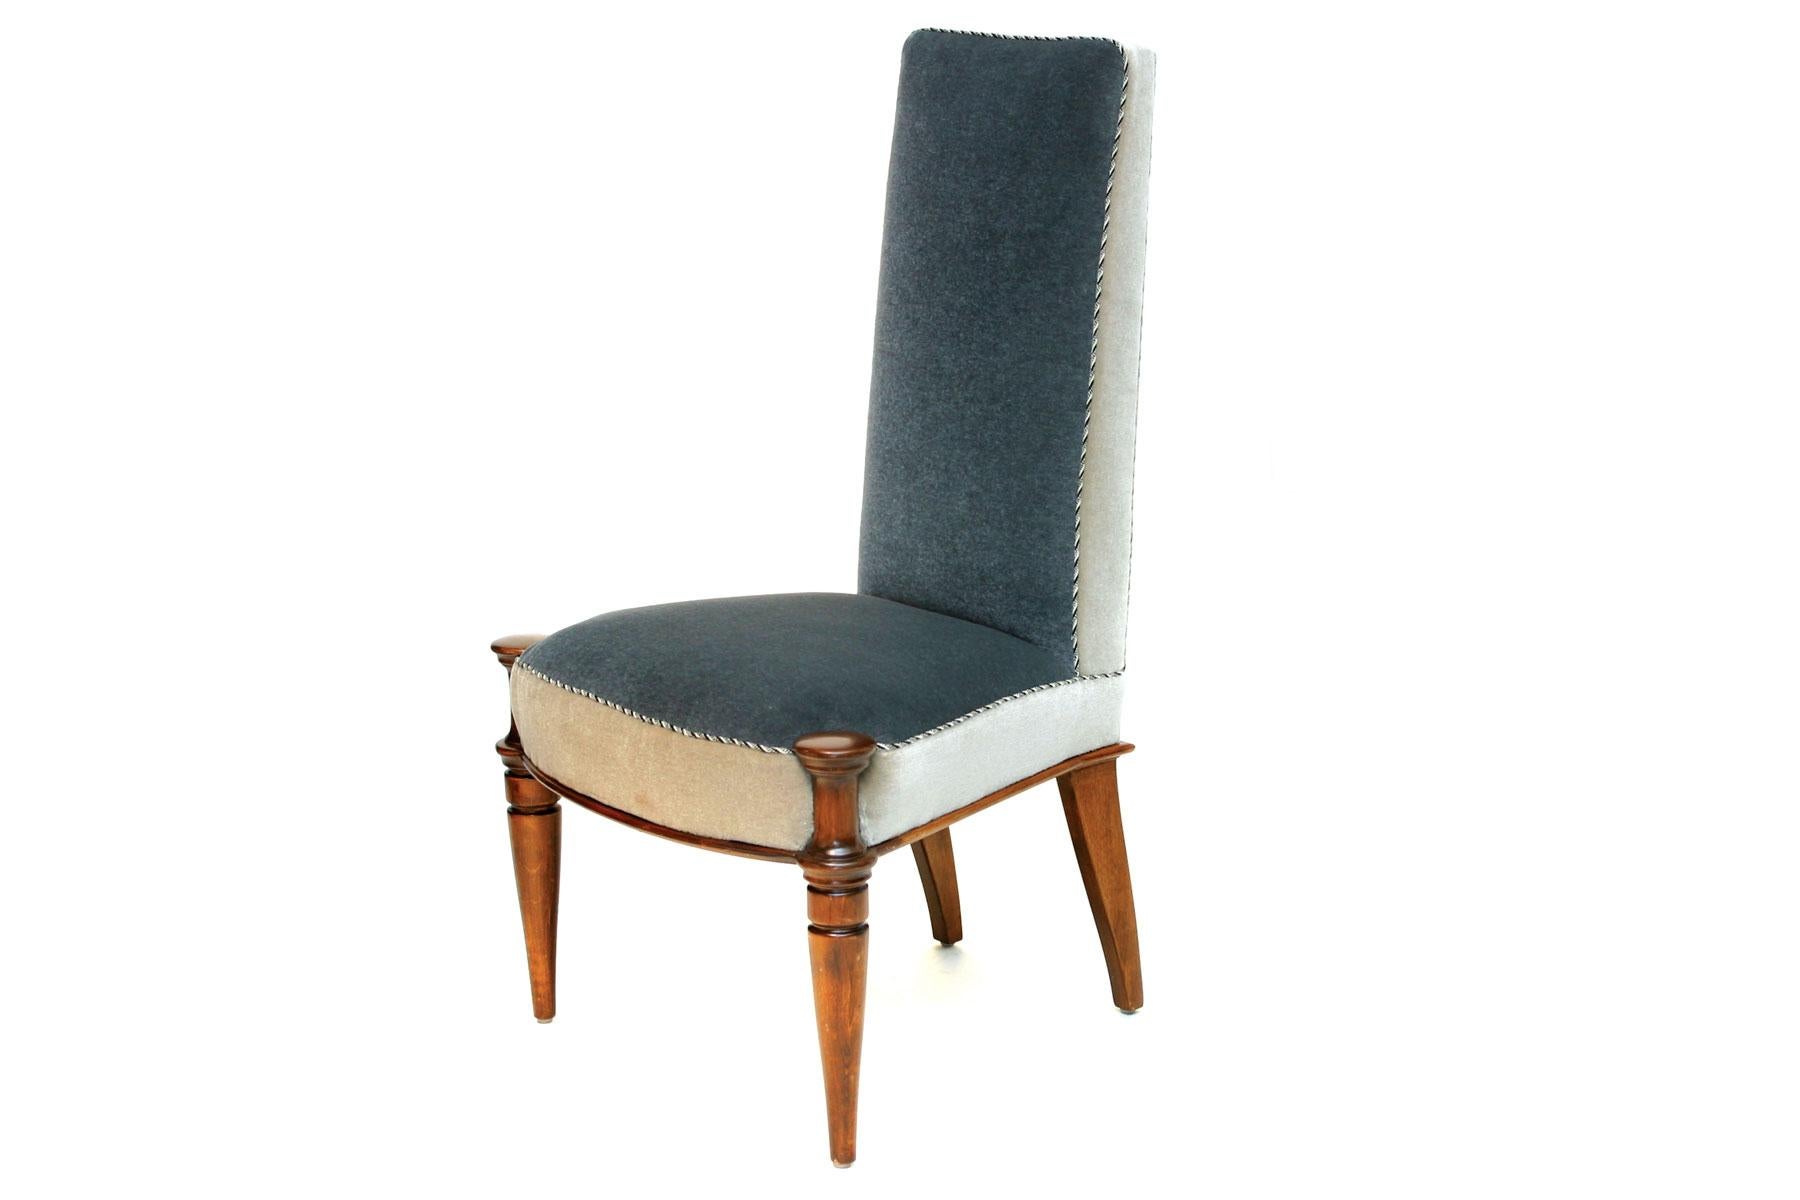 Custom Dining chair in the Style of Jules Leleu by Bourgeois Boheme Atelier .
Custom Wood Finishing and Upholstery work included in the price of each chair.
Customer provides fabric (COM).